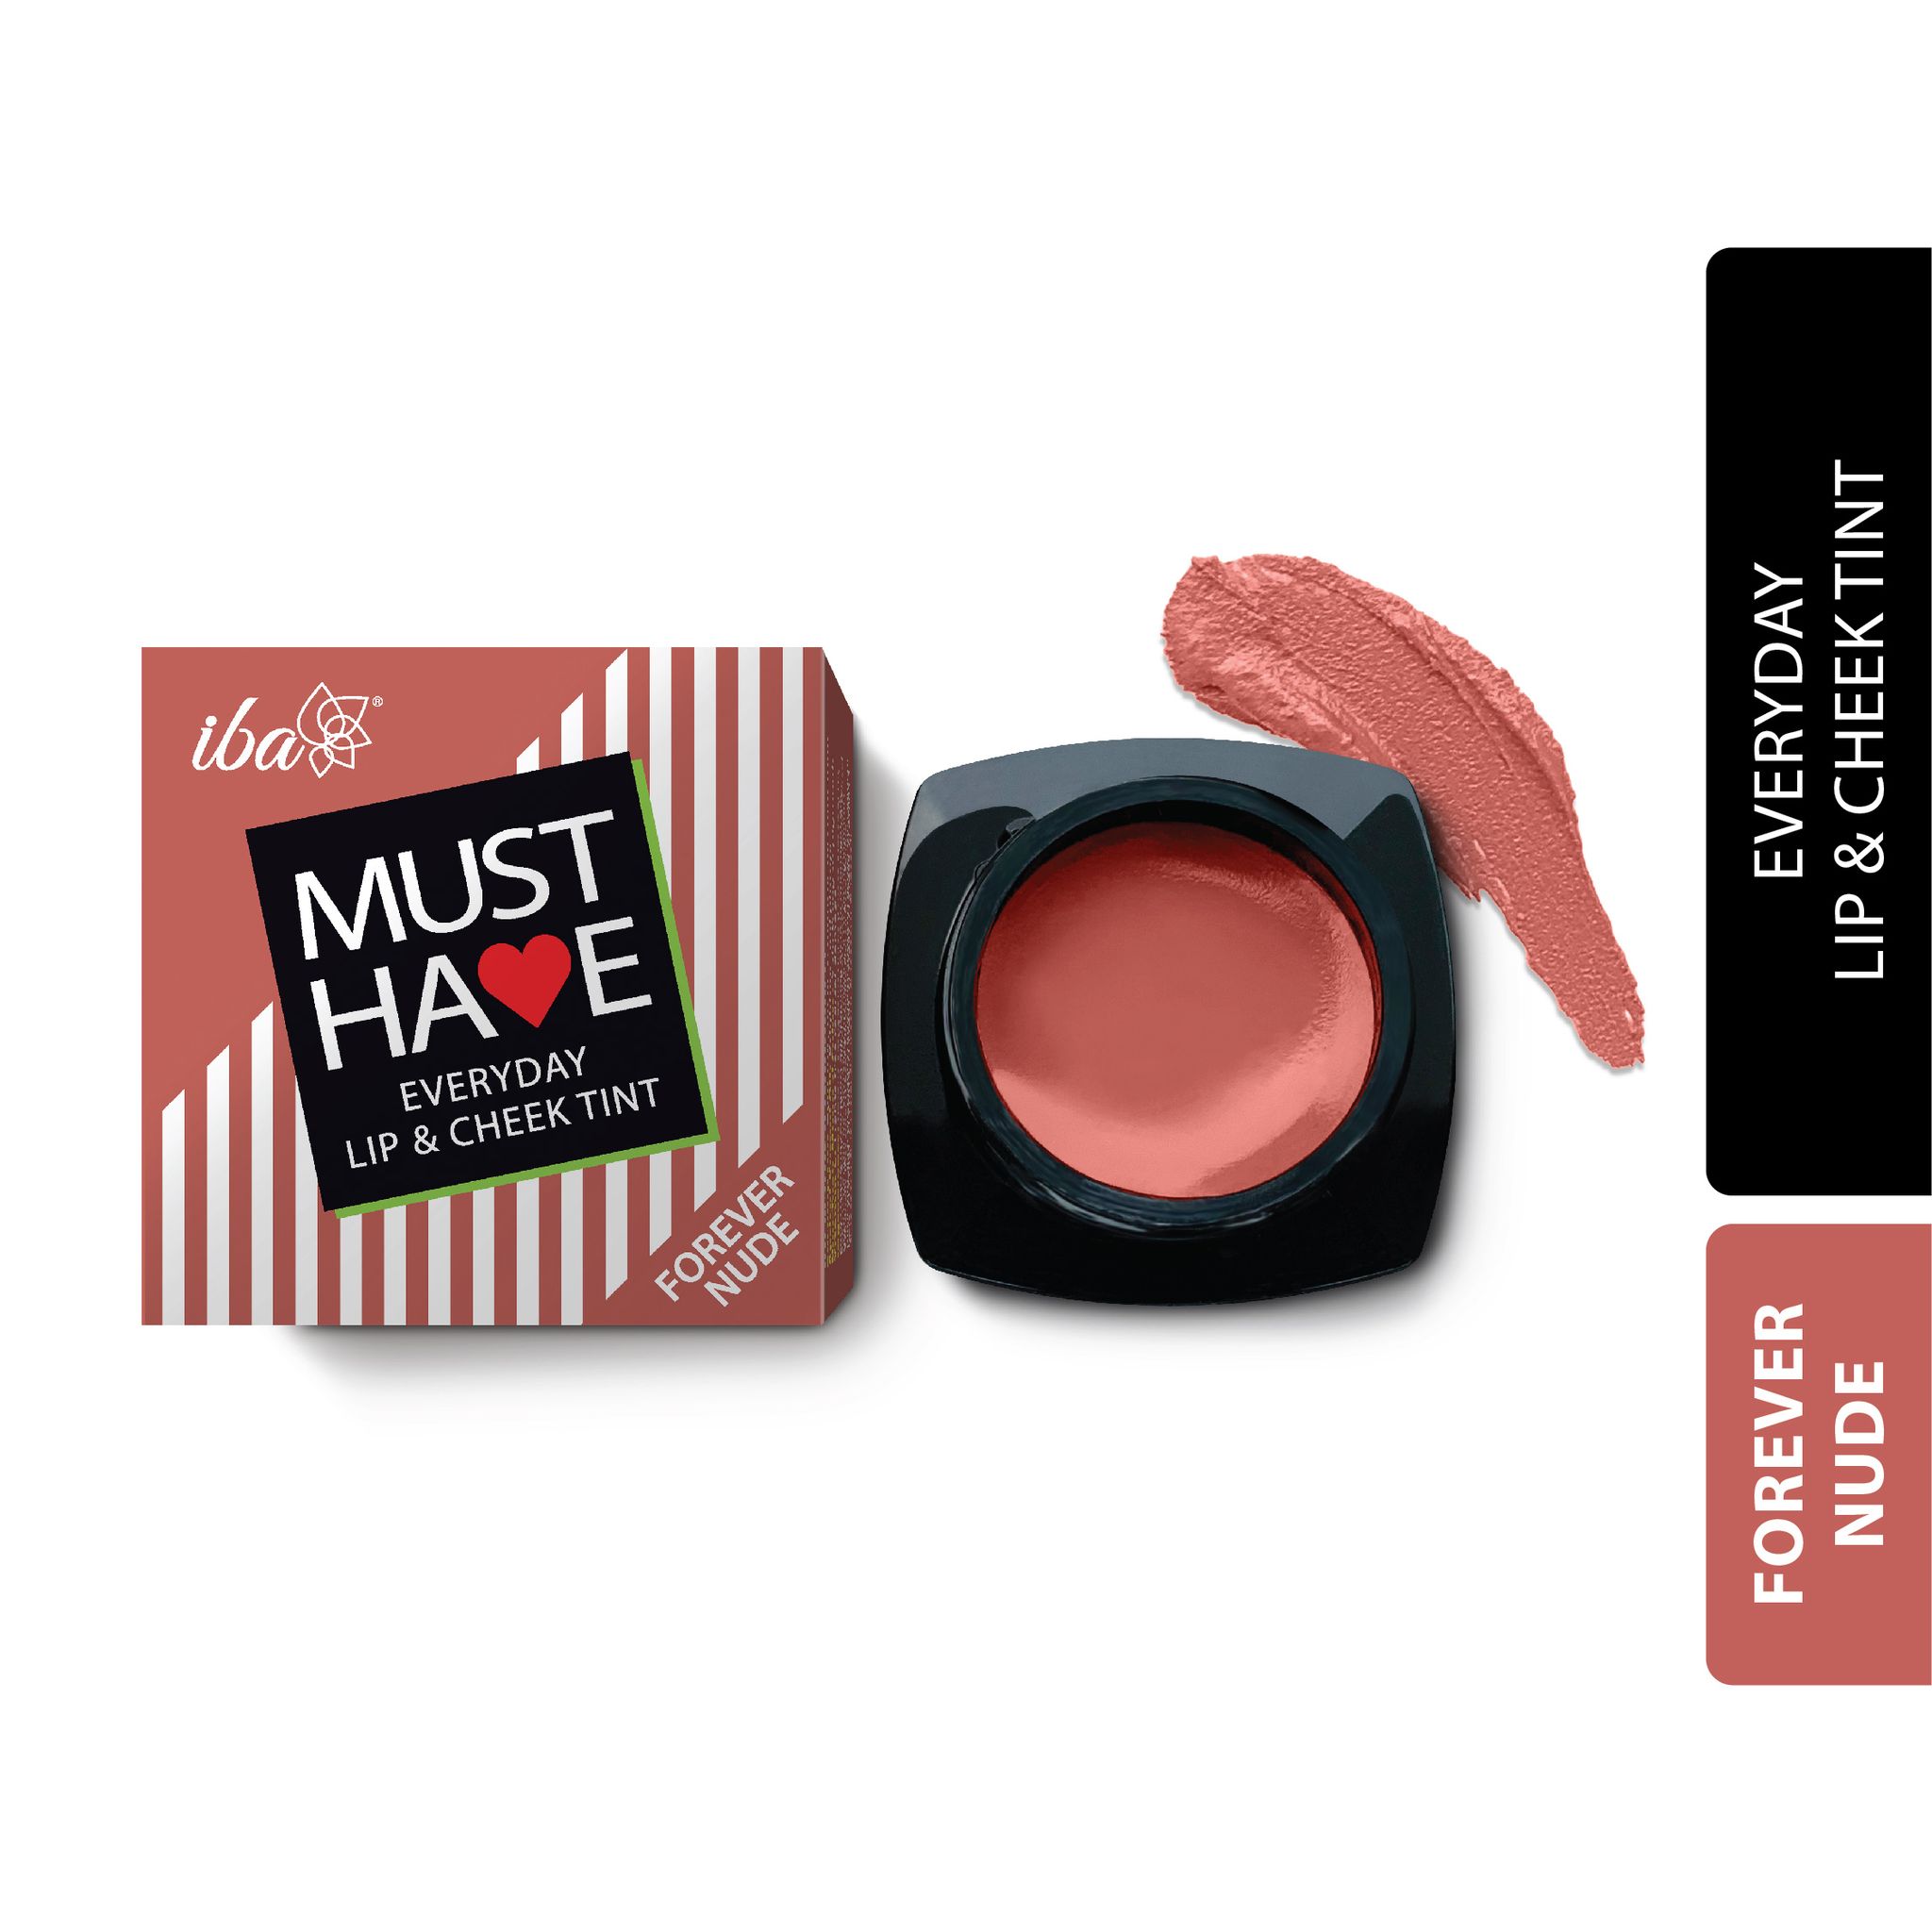 Iba Must Have Everyday Lip & Cheek Tint, Forever Nude, 8g | Enriched with Vitamin E and Rosehip Oil | Lips, Eyelids & Cheeks | Matte Finish | 100% Natural, Vegan & Cruelty-Free